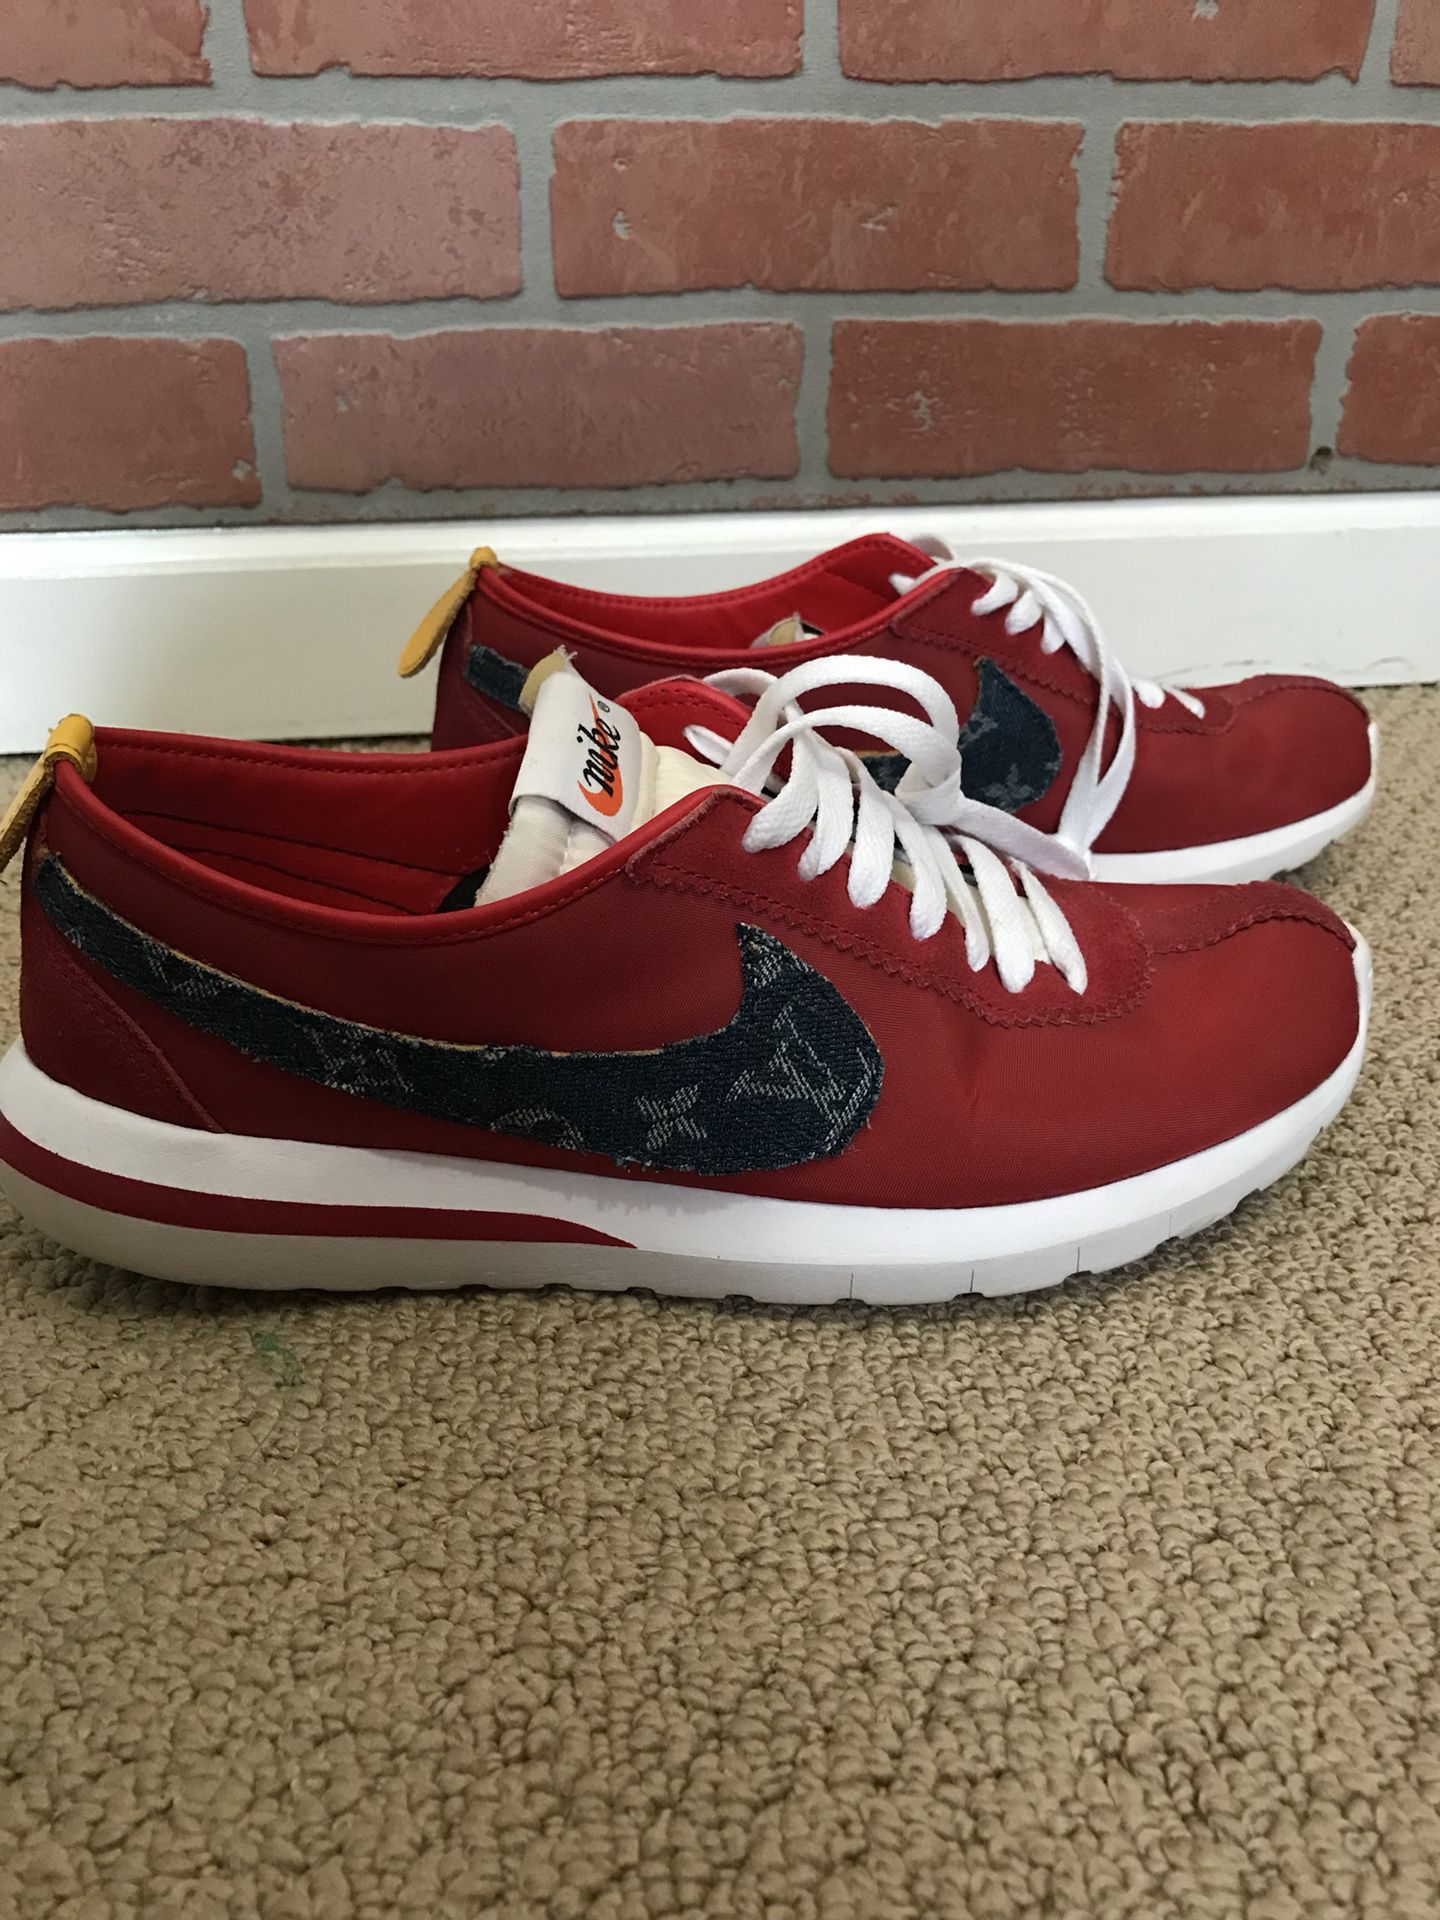 Custom Louis Vuitton x Nike Cortez runners for Sale in Scotts Valley, CA -  OfferUp